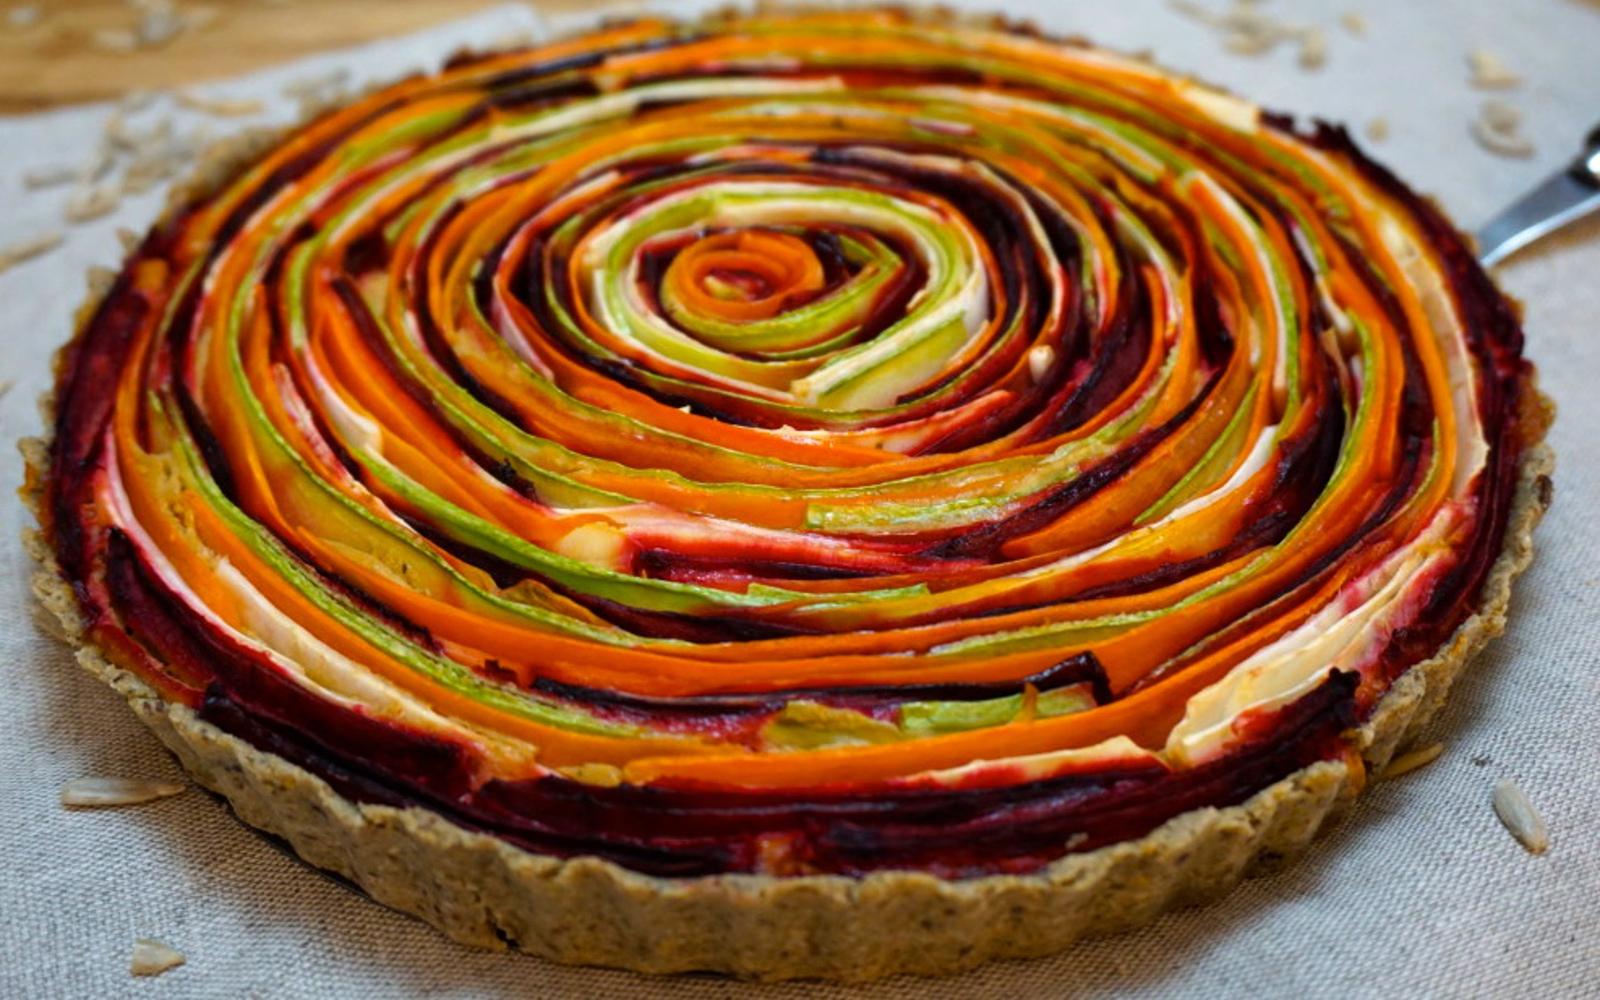 Vegetable Rose Tart With Cheesy Sun-Dried Tomato Filling